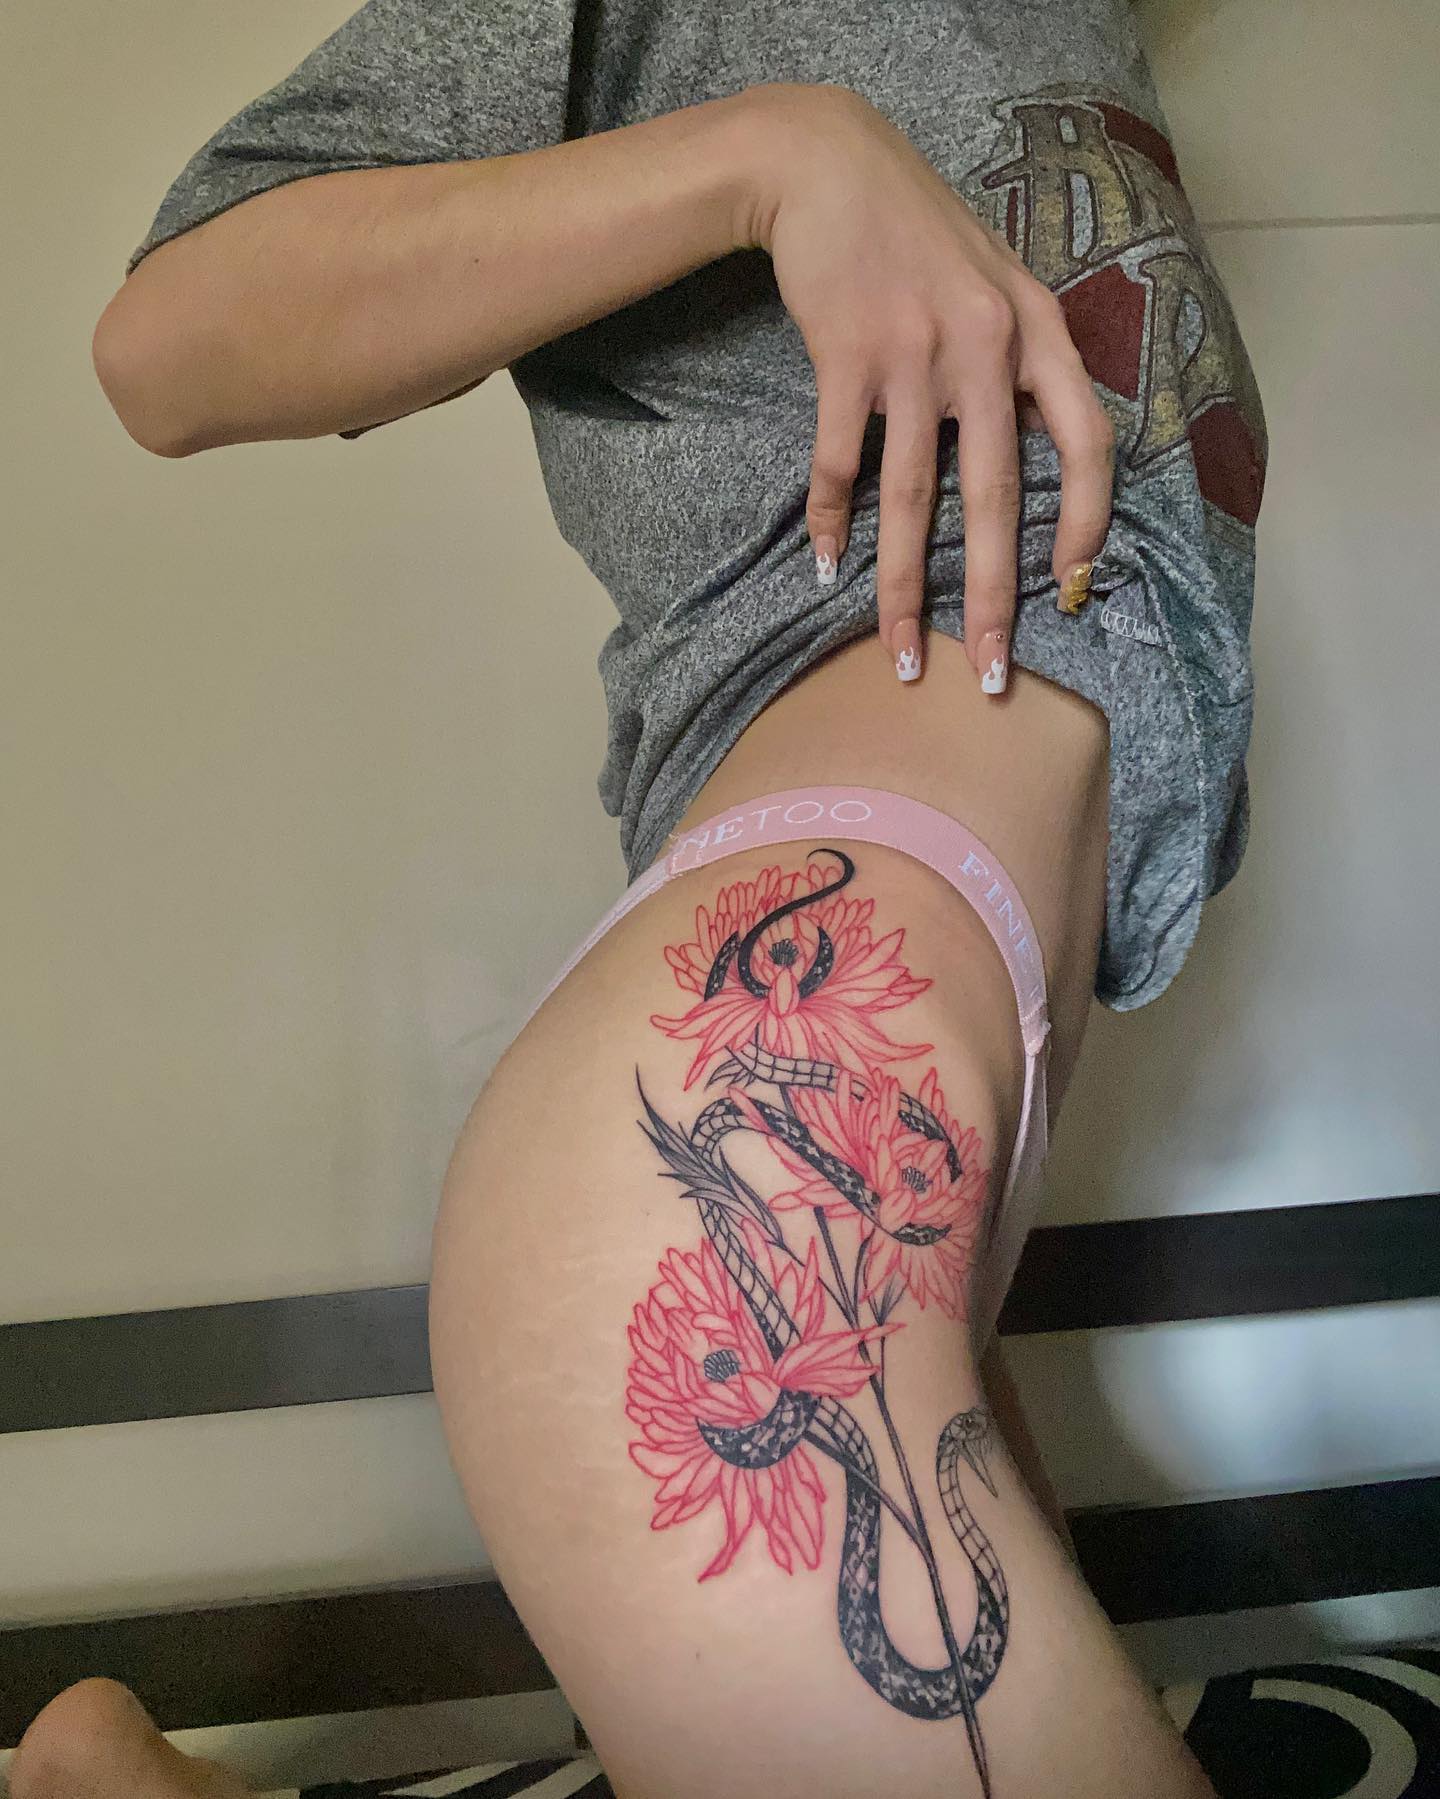 This hip tattoo with a dragon design is for women who are naturally feisty and bold. If you are all about glamour and you have a bold presence, this will suit you. Show it off if you fancy spring-inspired and elegant ideas.